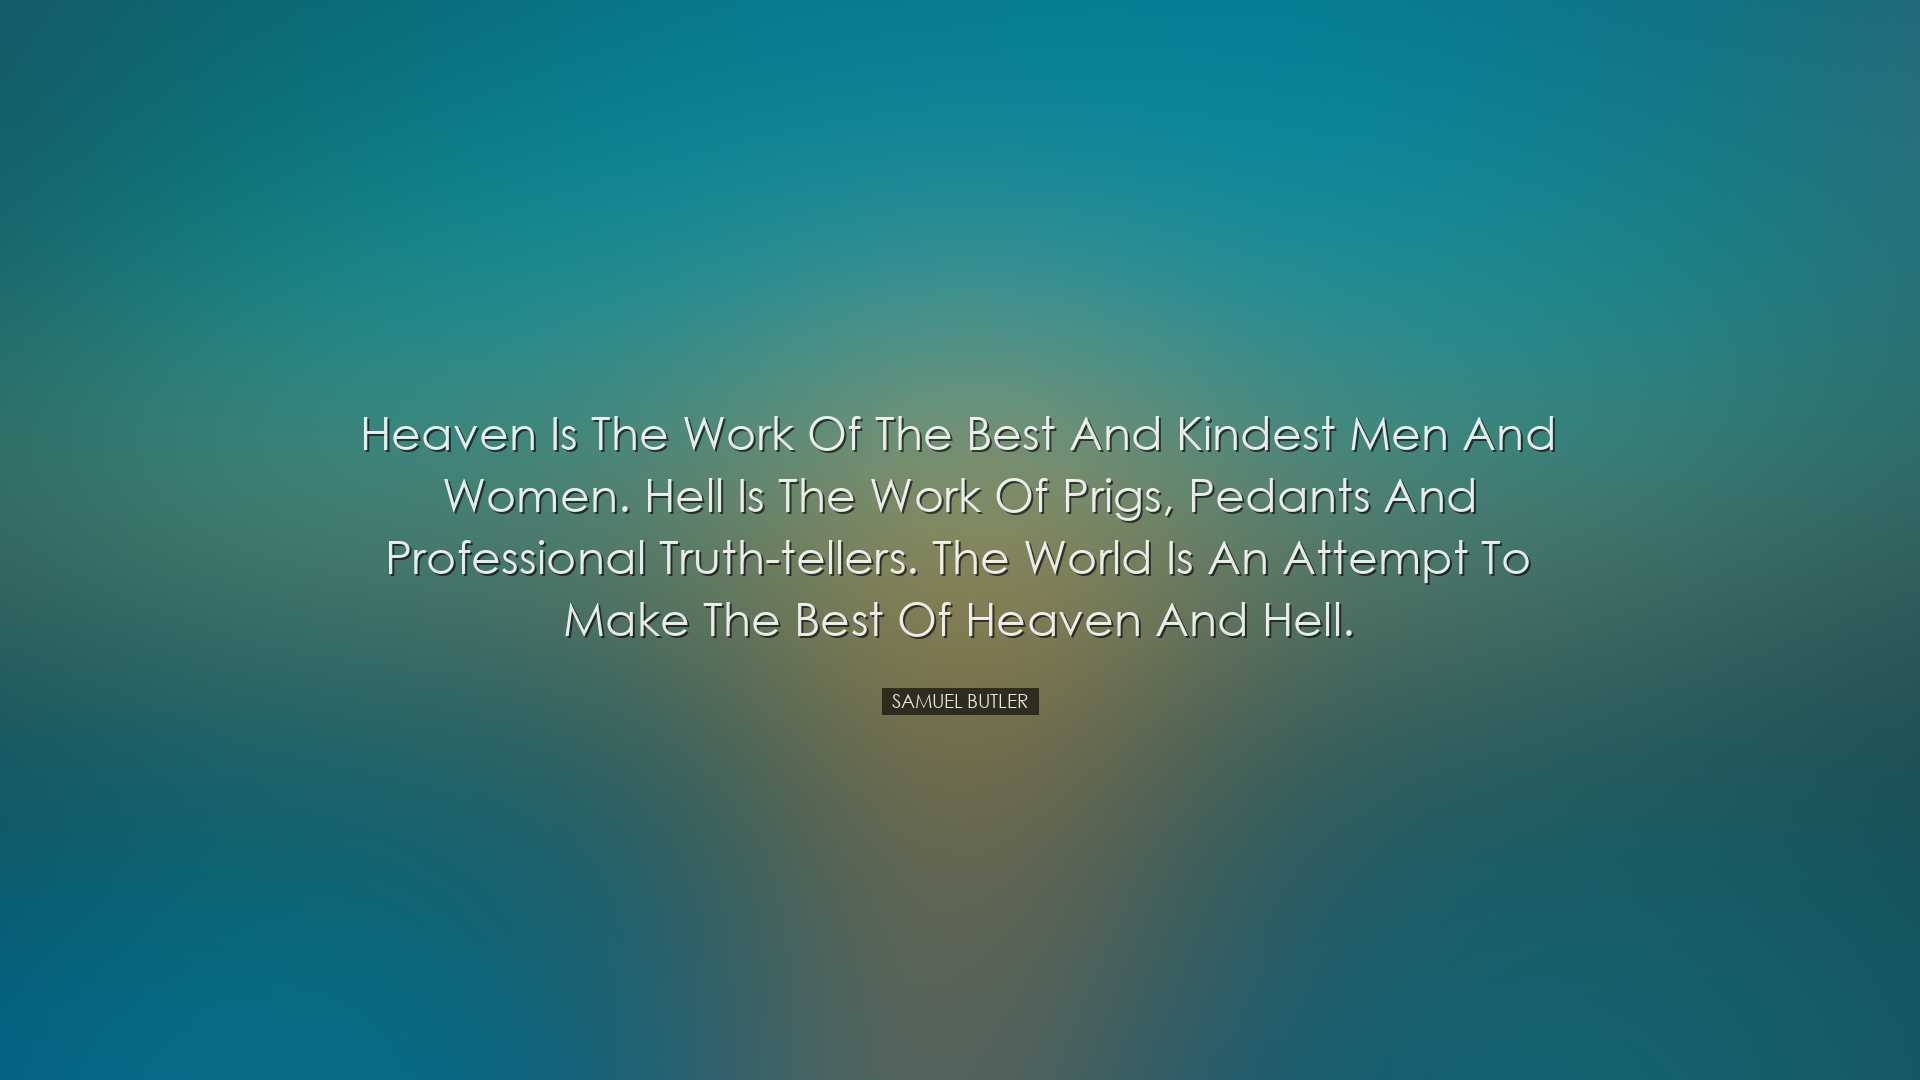 Heaven is the work of the best and kindest men and women. Hell is